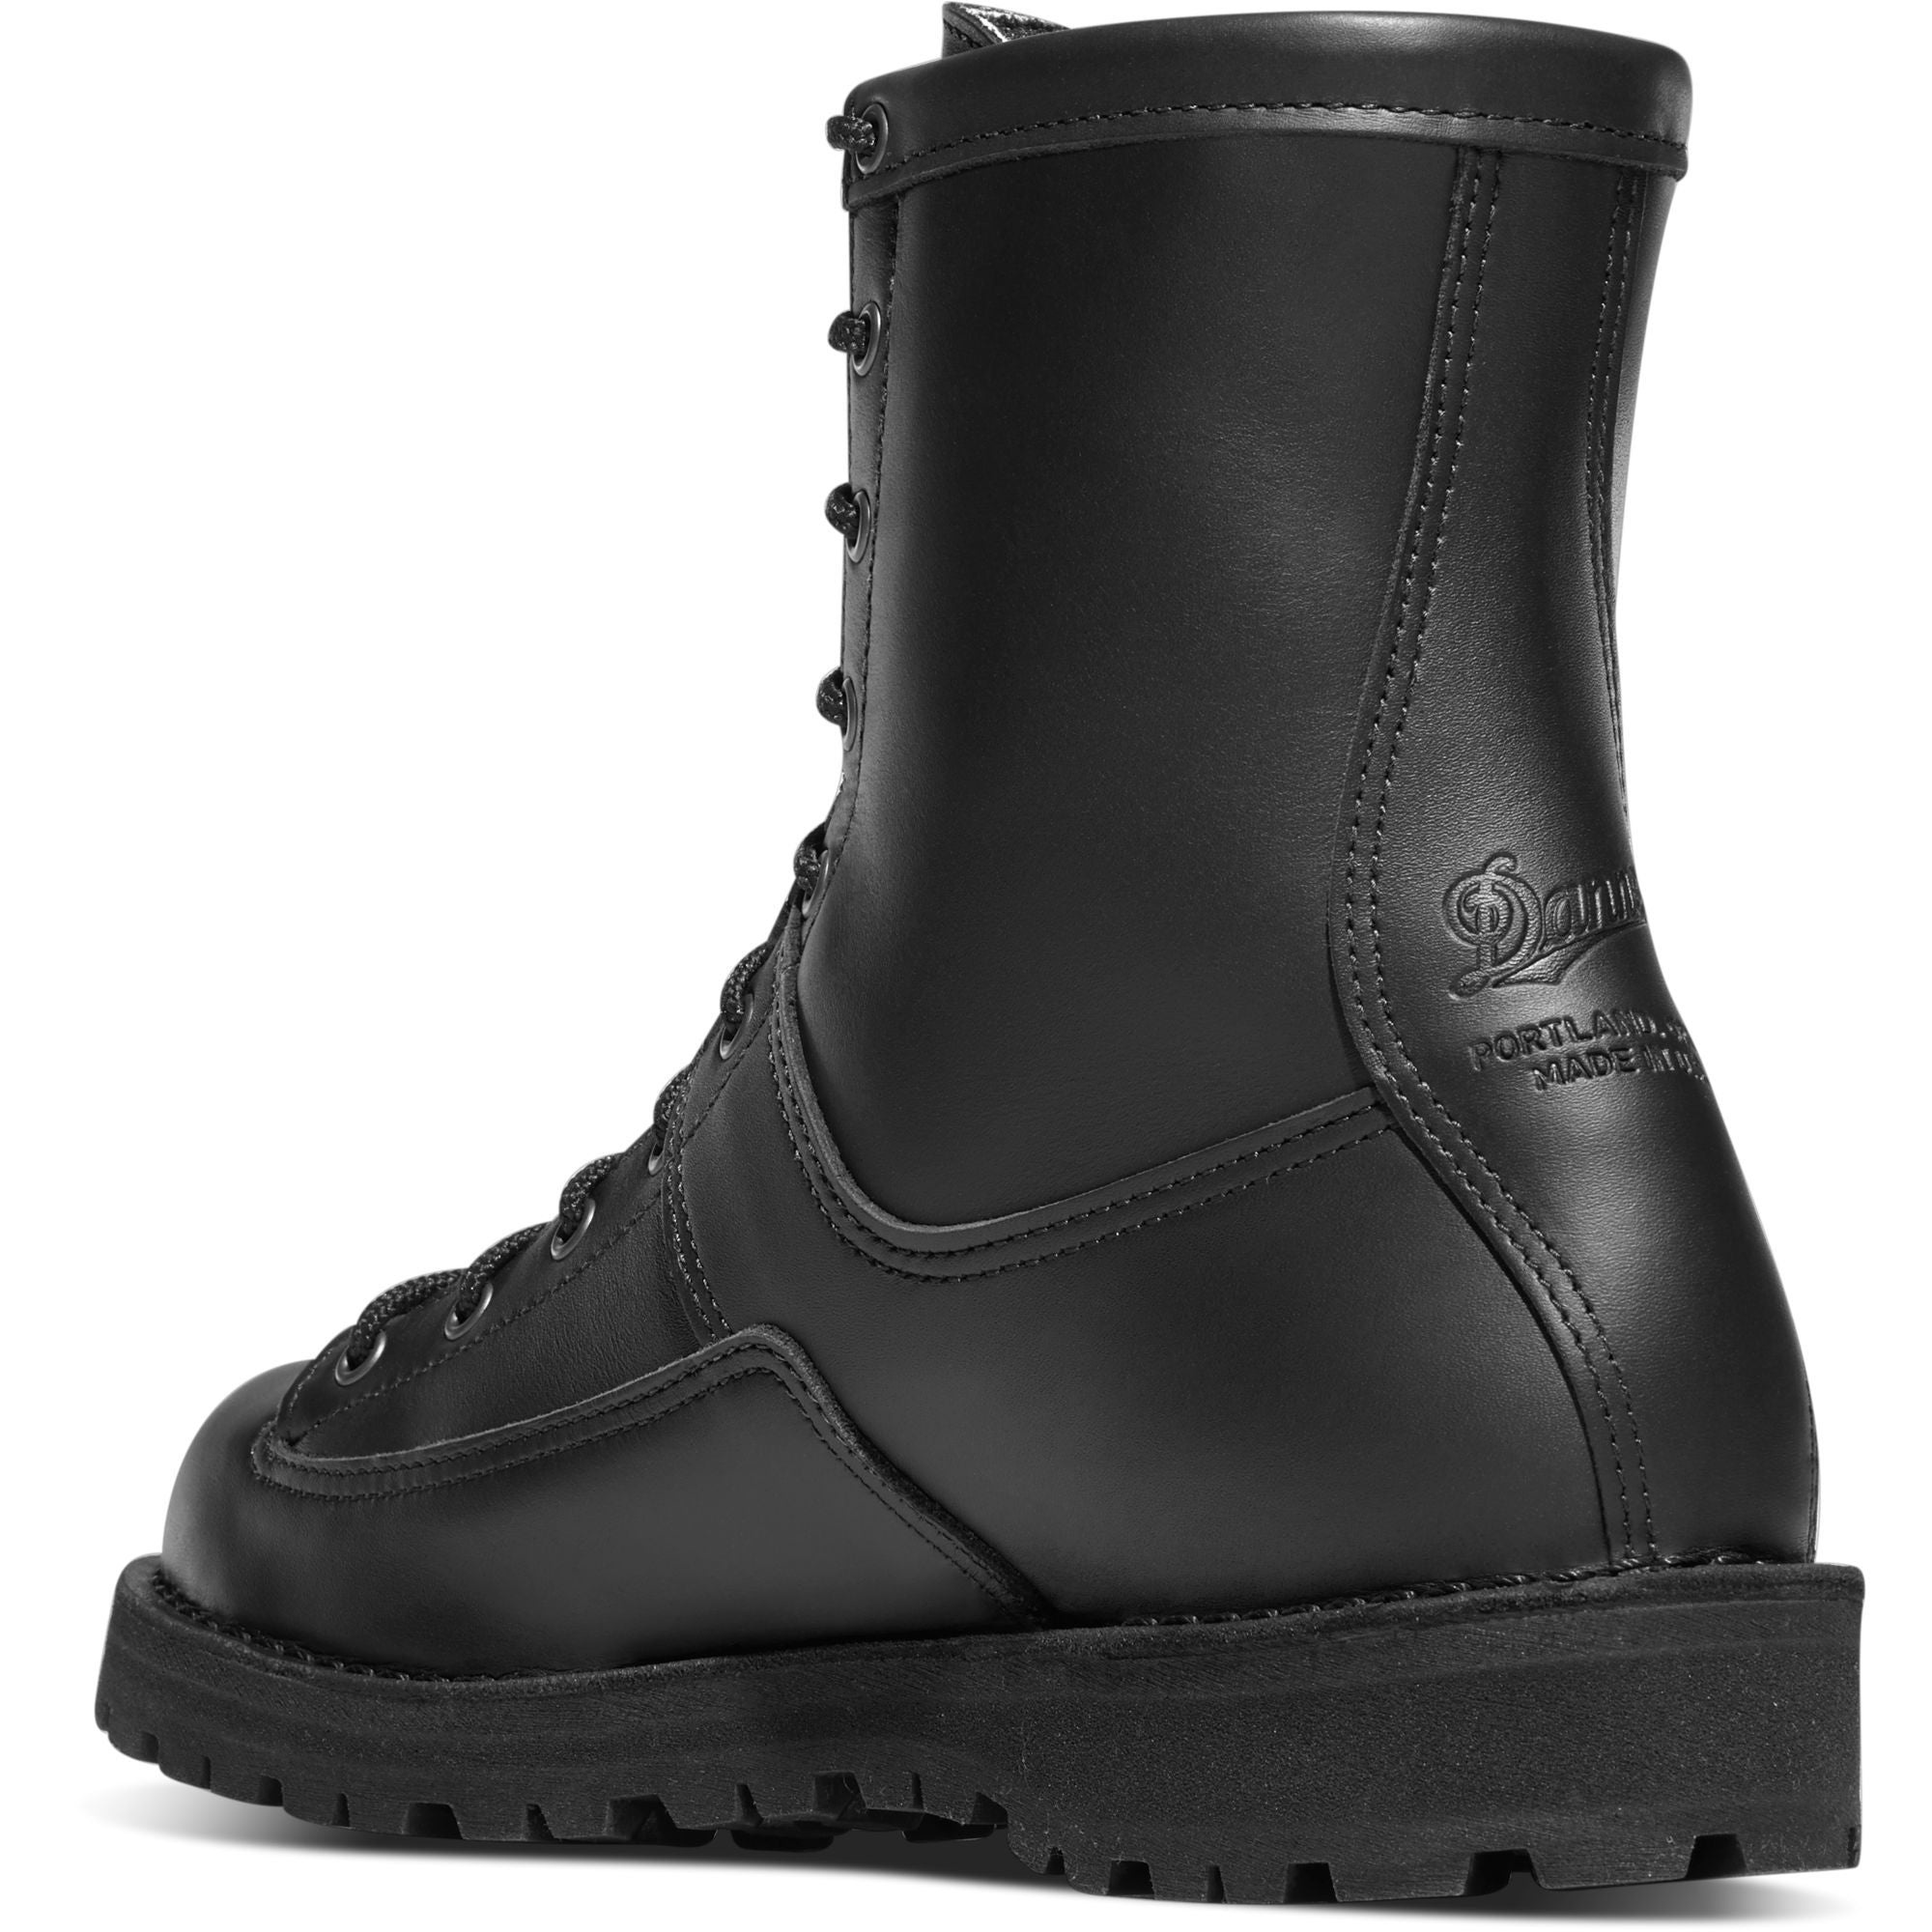 Danner Men's Recon USA Made 8" Insulated WP Duty Boot - Black - 69410  - Overlook Boots